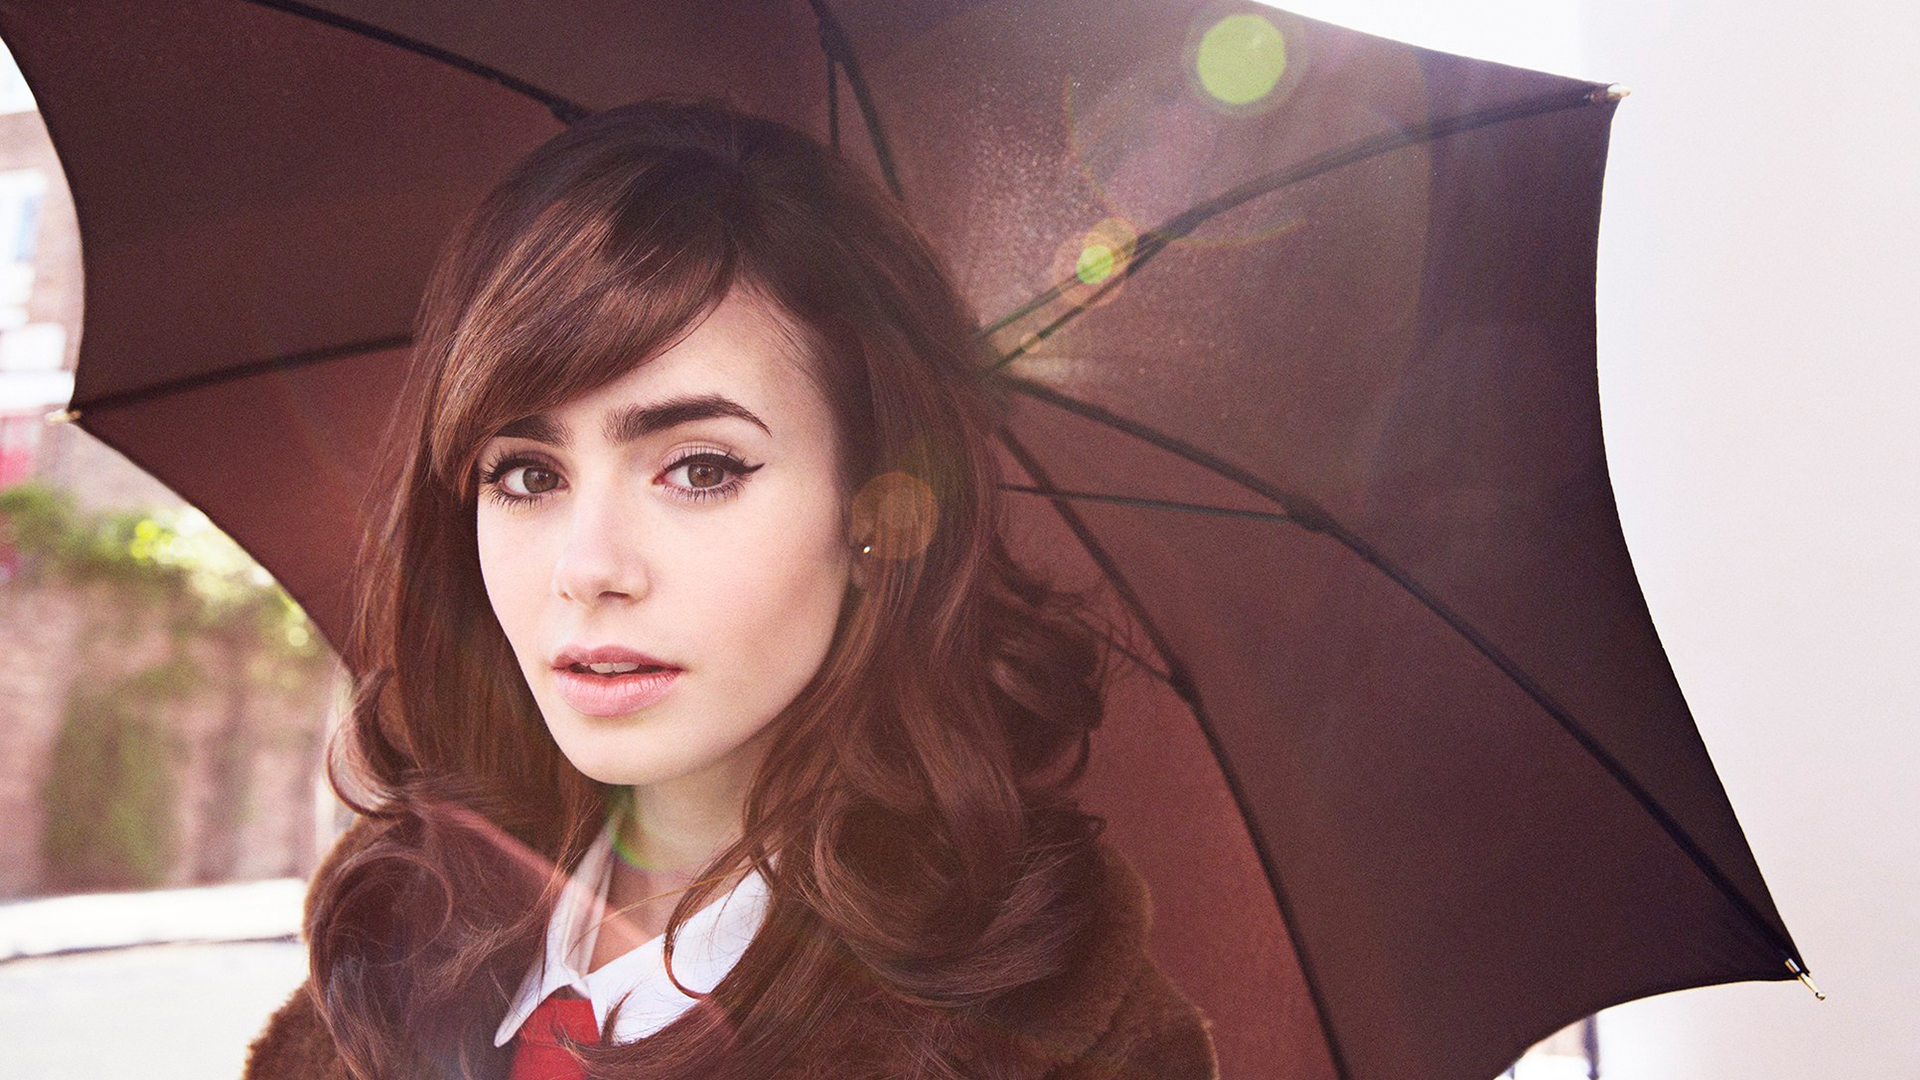 People 1920x1080 Lily Collins women brunette actress celebrity umbrella long eyelashes women outdoors looking at viewer lens flare fur coats glamour pale British women with umbrella young women classy